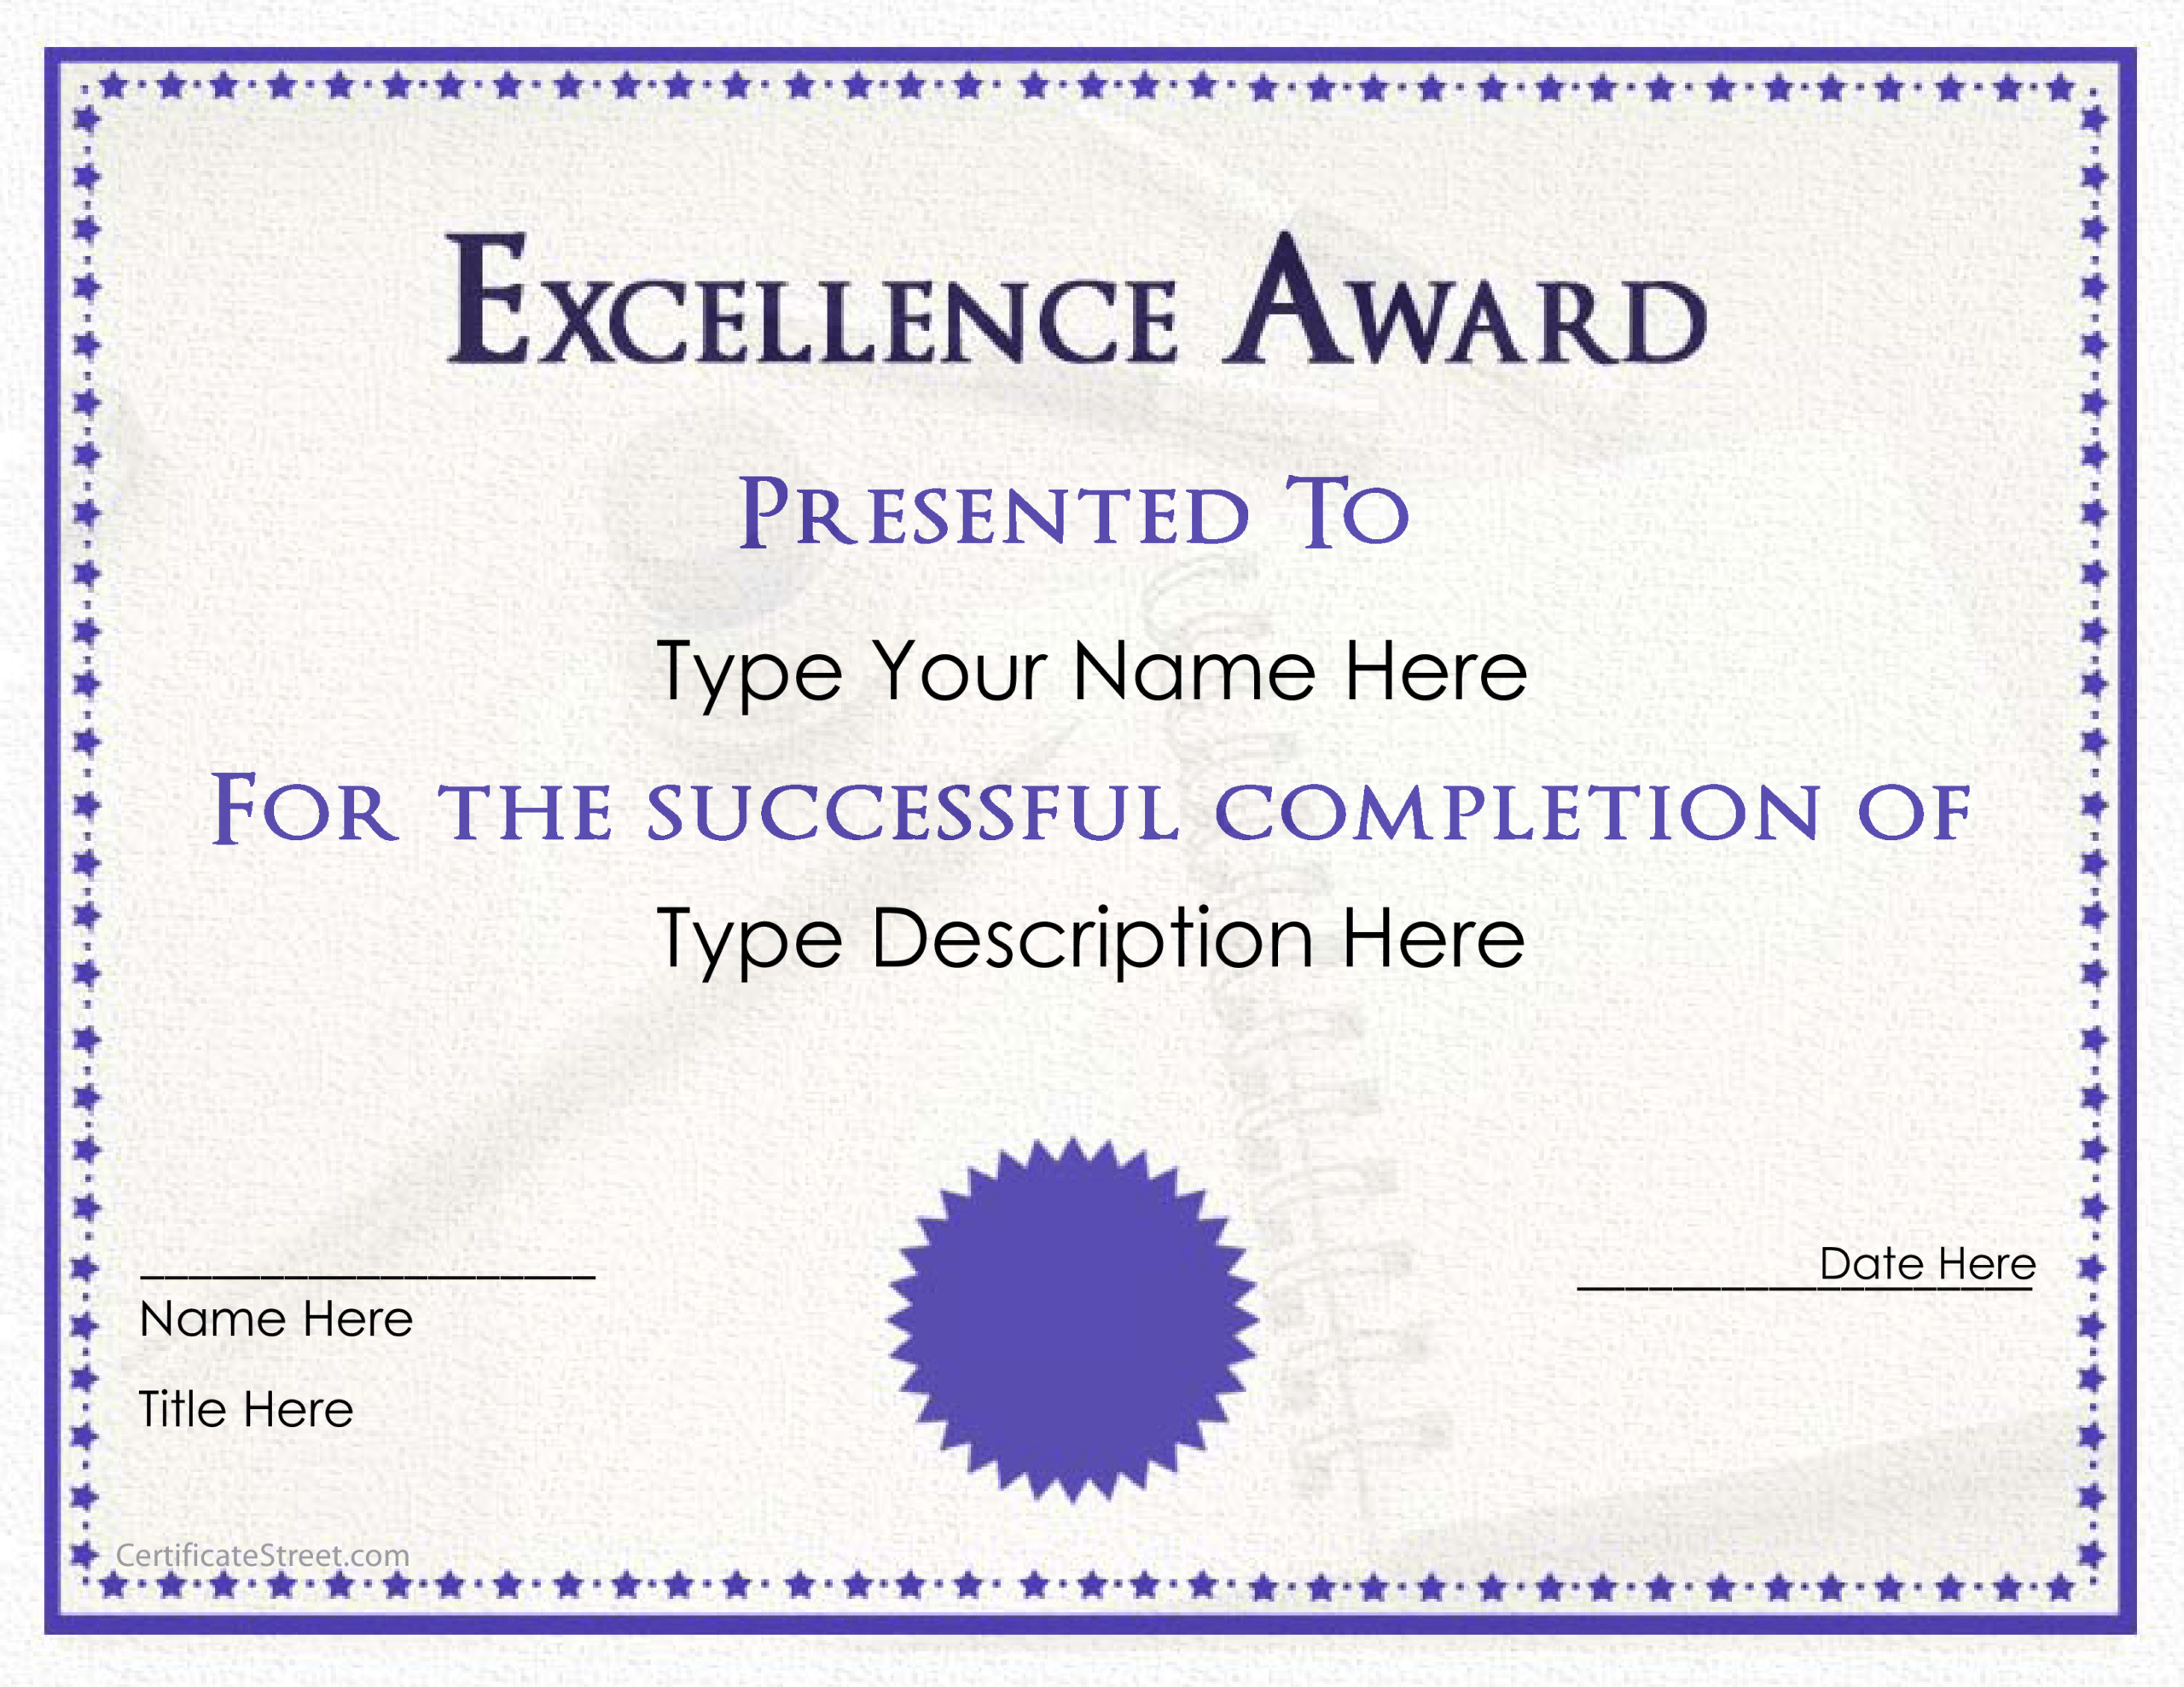 Excellence Award Certificate | Templates At In Award Of Excellence Certificate Template